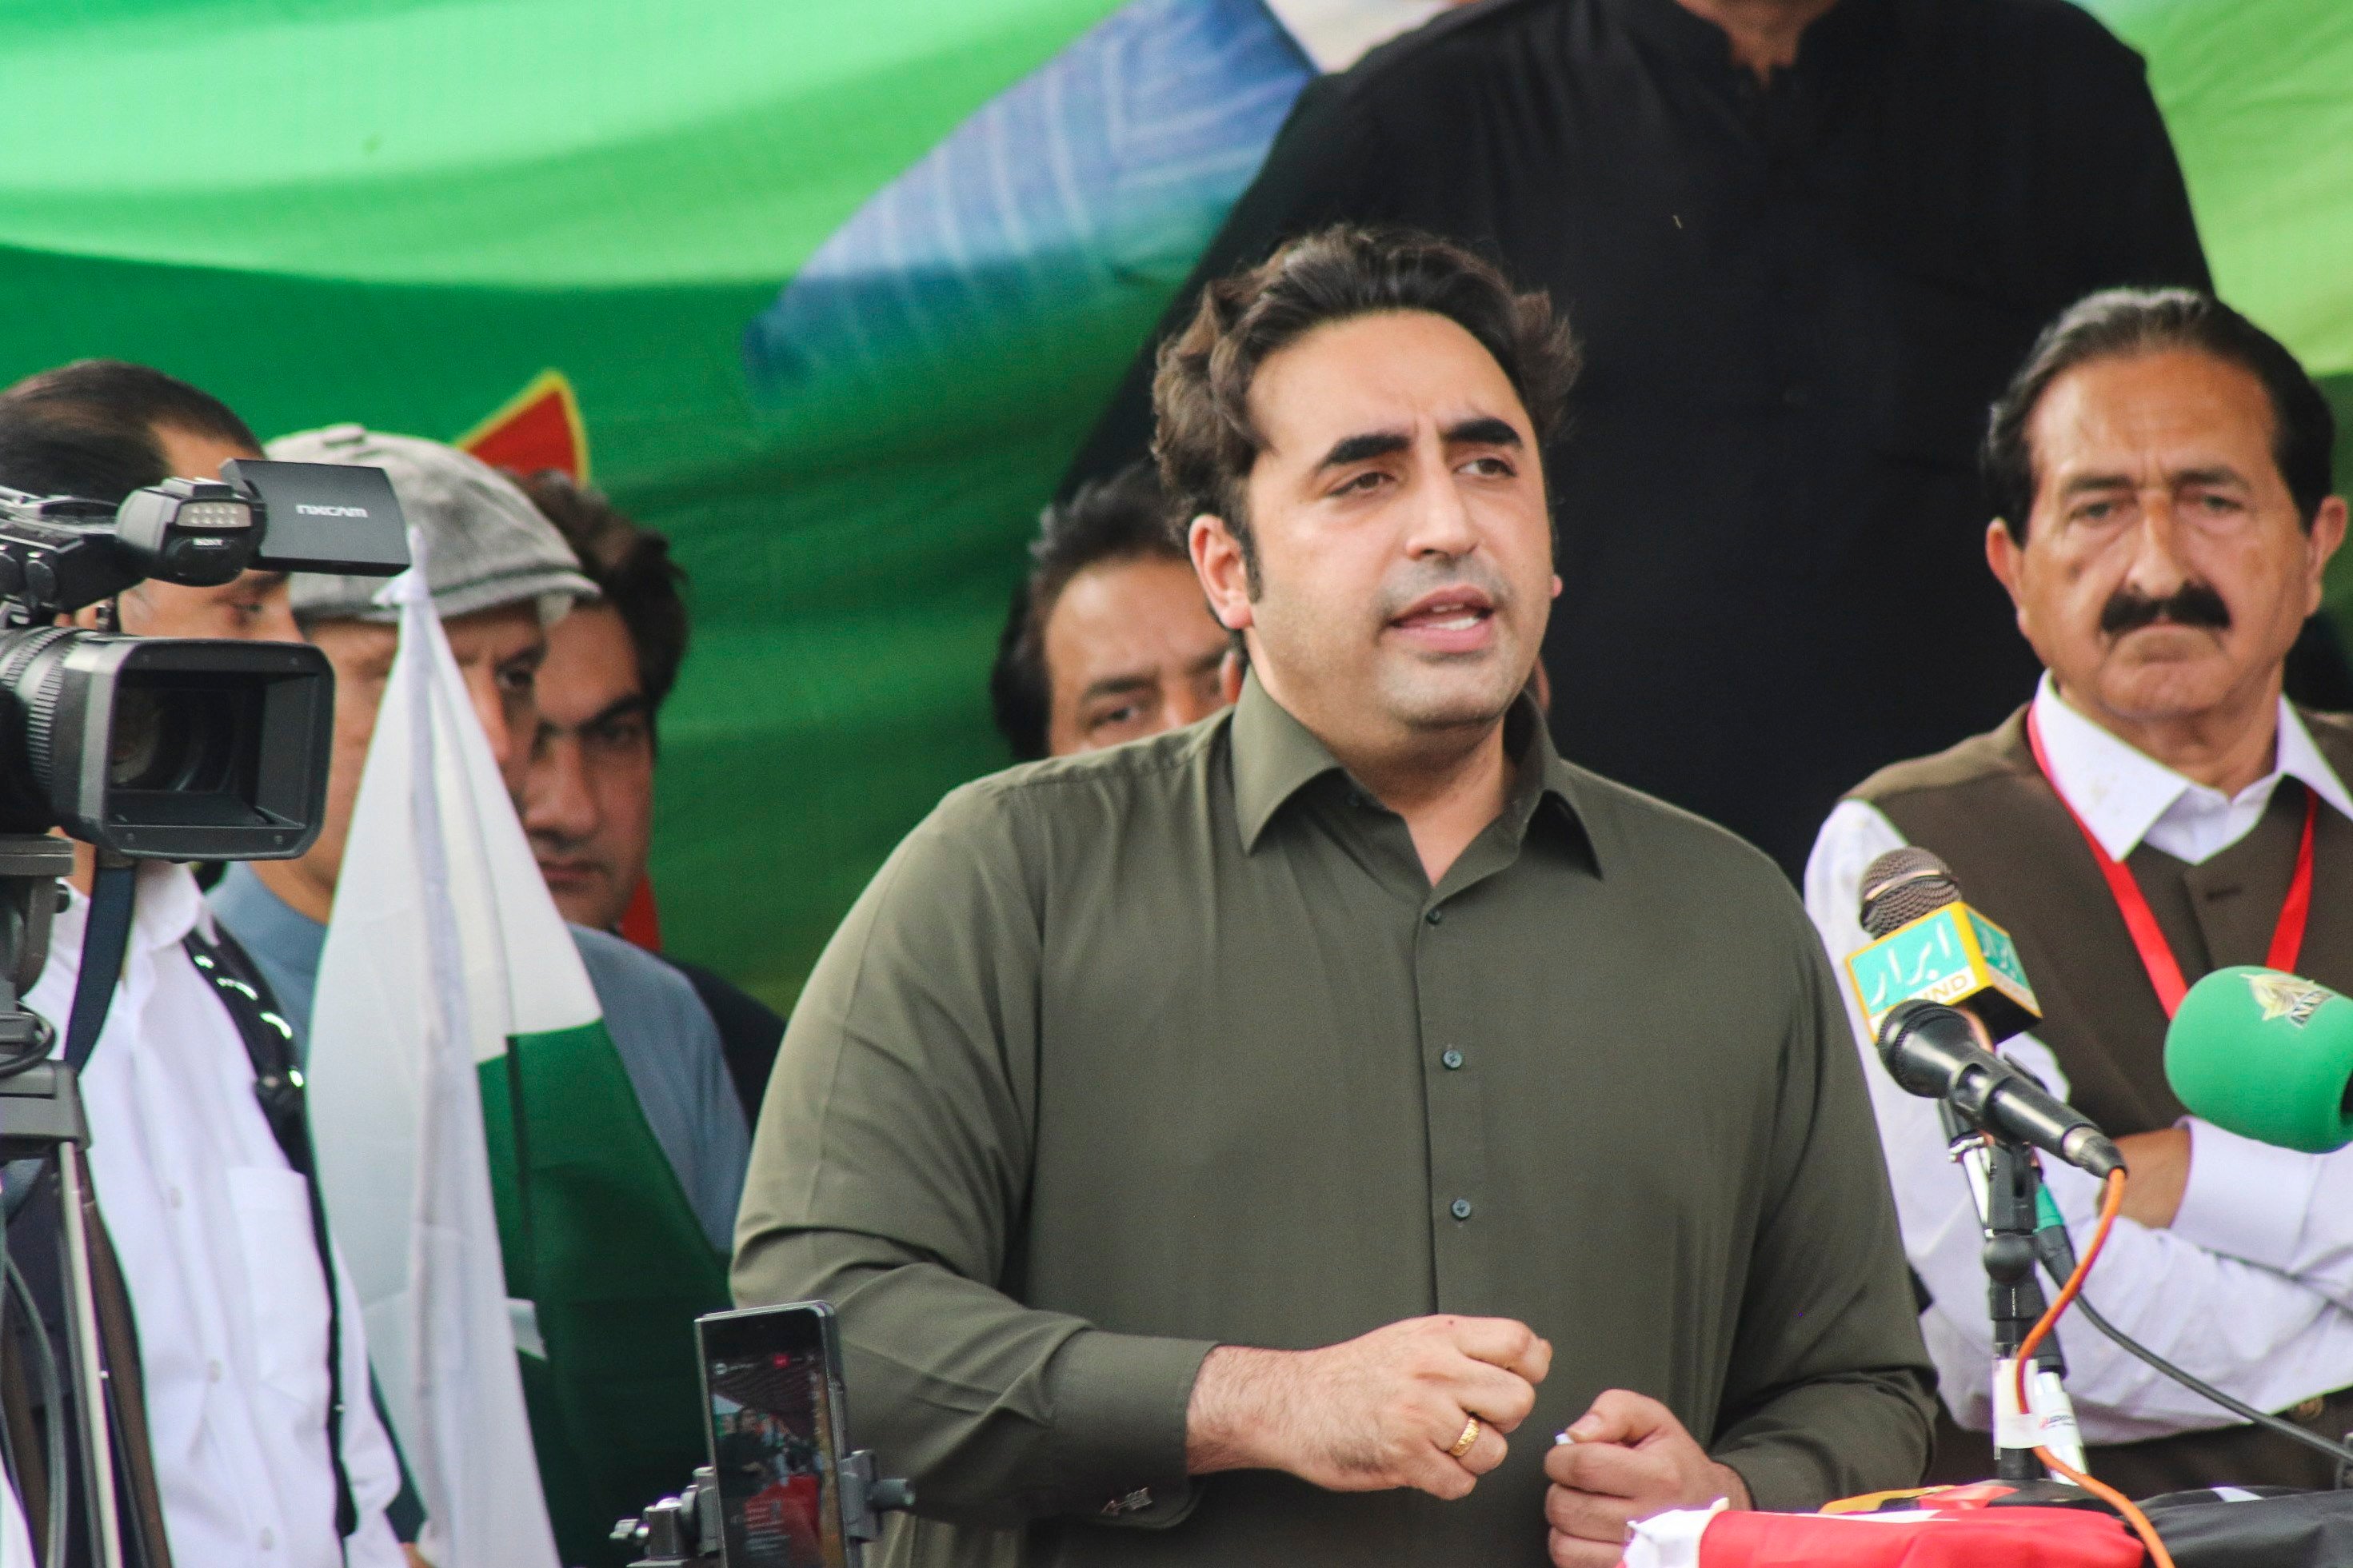 Pakistani Foreign Minister Bilawal Bhutto Zardari (centre) during an event in Bagh, Pakistani-administered Kashmir region, on May 23. Photo: EPA-EFE